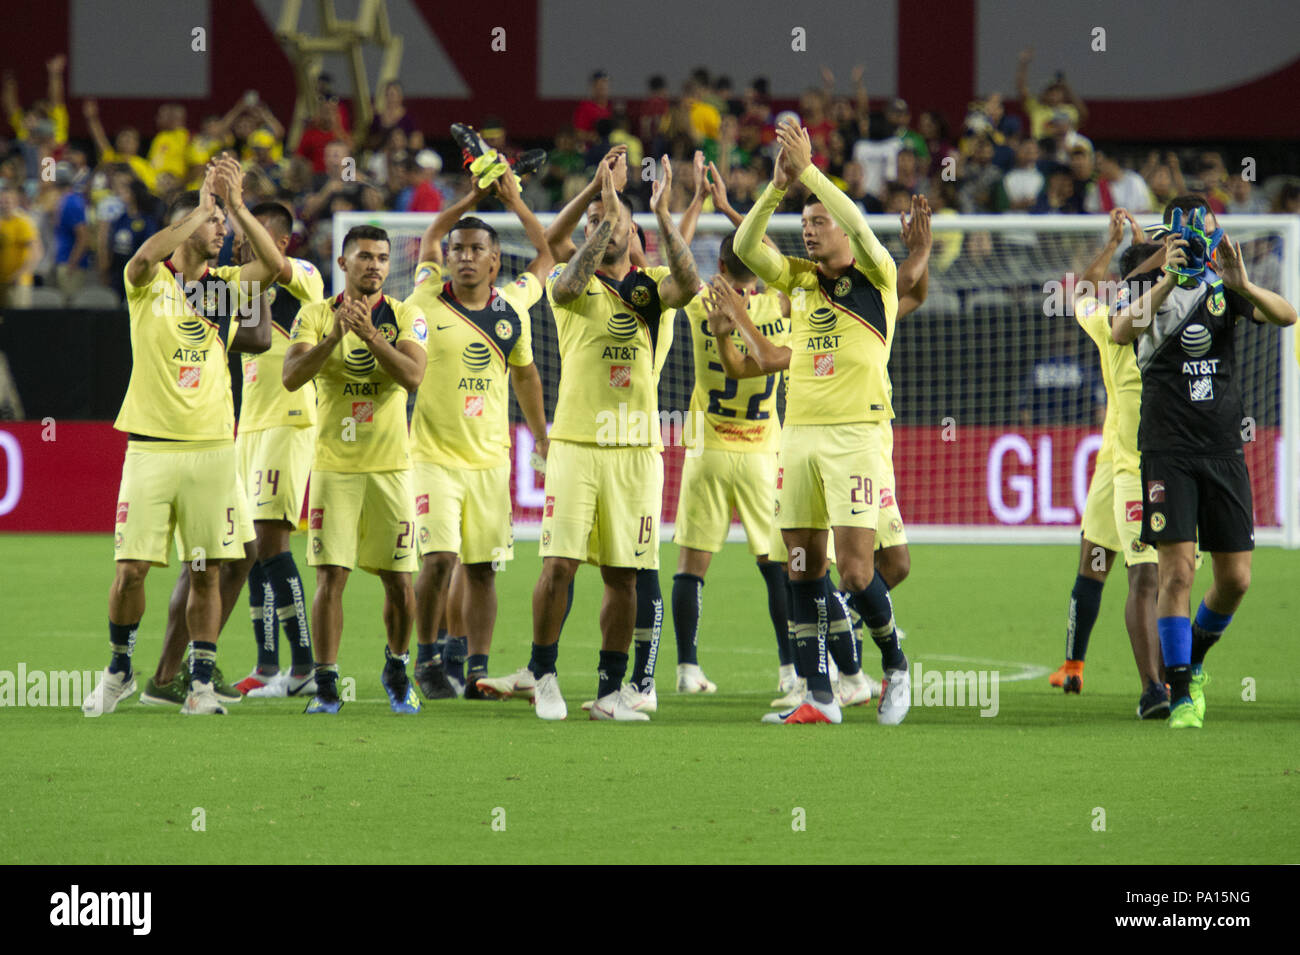 Glendale, Arizona, USA. 19th July, 2018. Club America applause the crowd after the game against Manchester United Thursday, July 19, 2018, at University of Phoenix Stadium in Glendale, Arizona. Manchester United tied 1-1 against Club America. Credit: Jeff Brown/ZUMA Wire/Alamy Live News Stock Photo